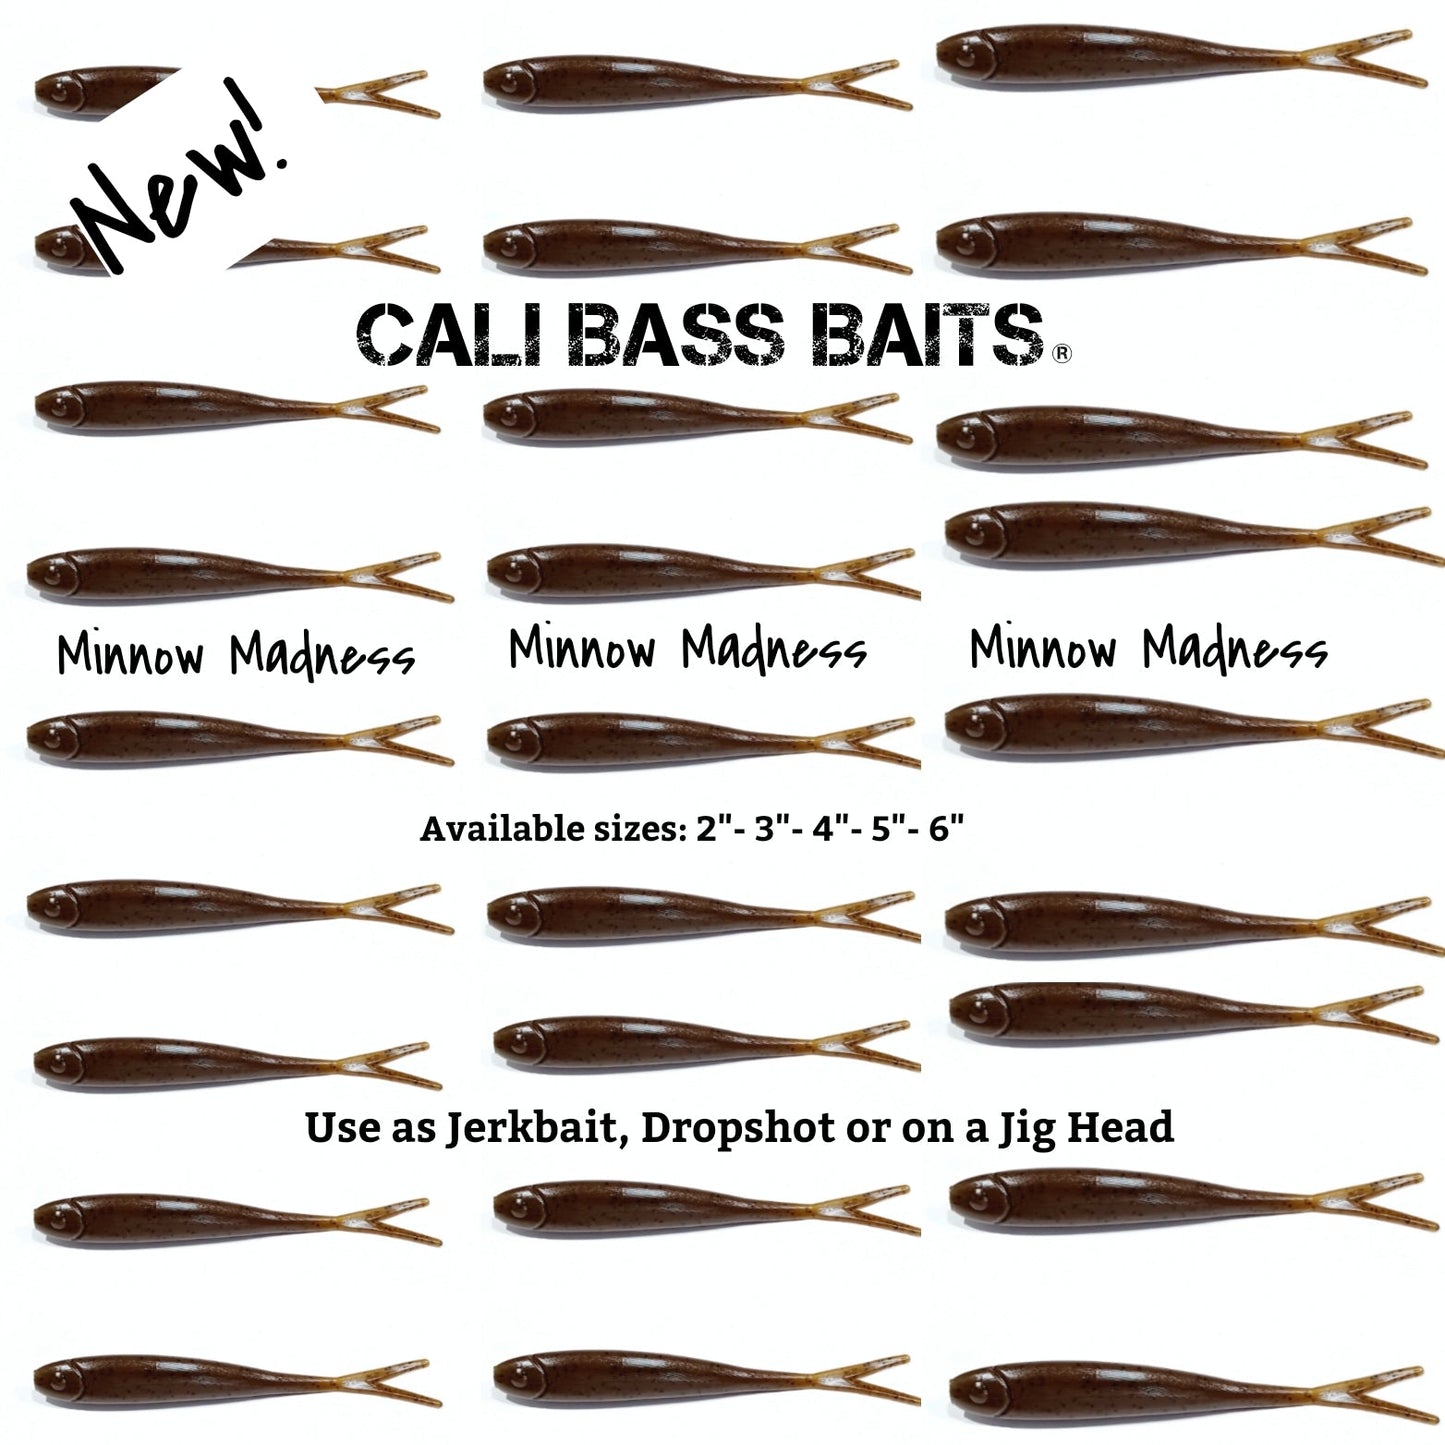 TROUT CRAPPIE & BASS BAITS* New! Minnow Madness (SIZE 3 inch bait) G –  Cali Bass Baits